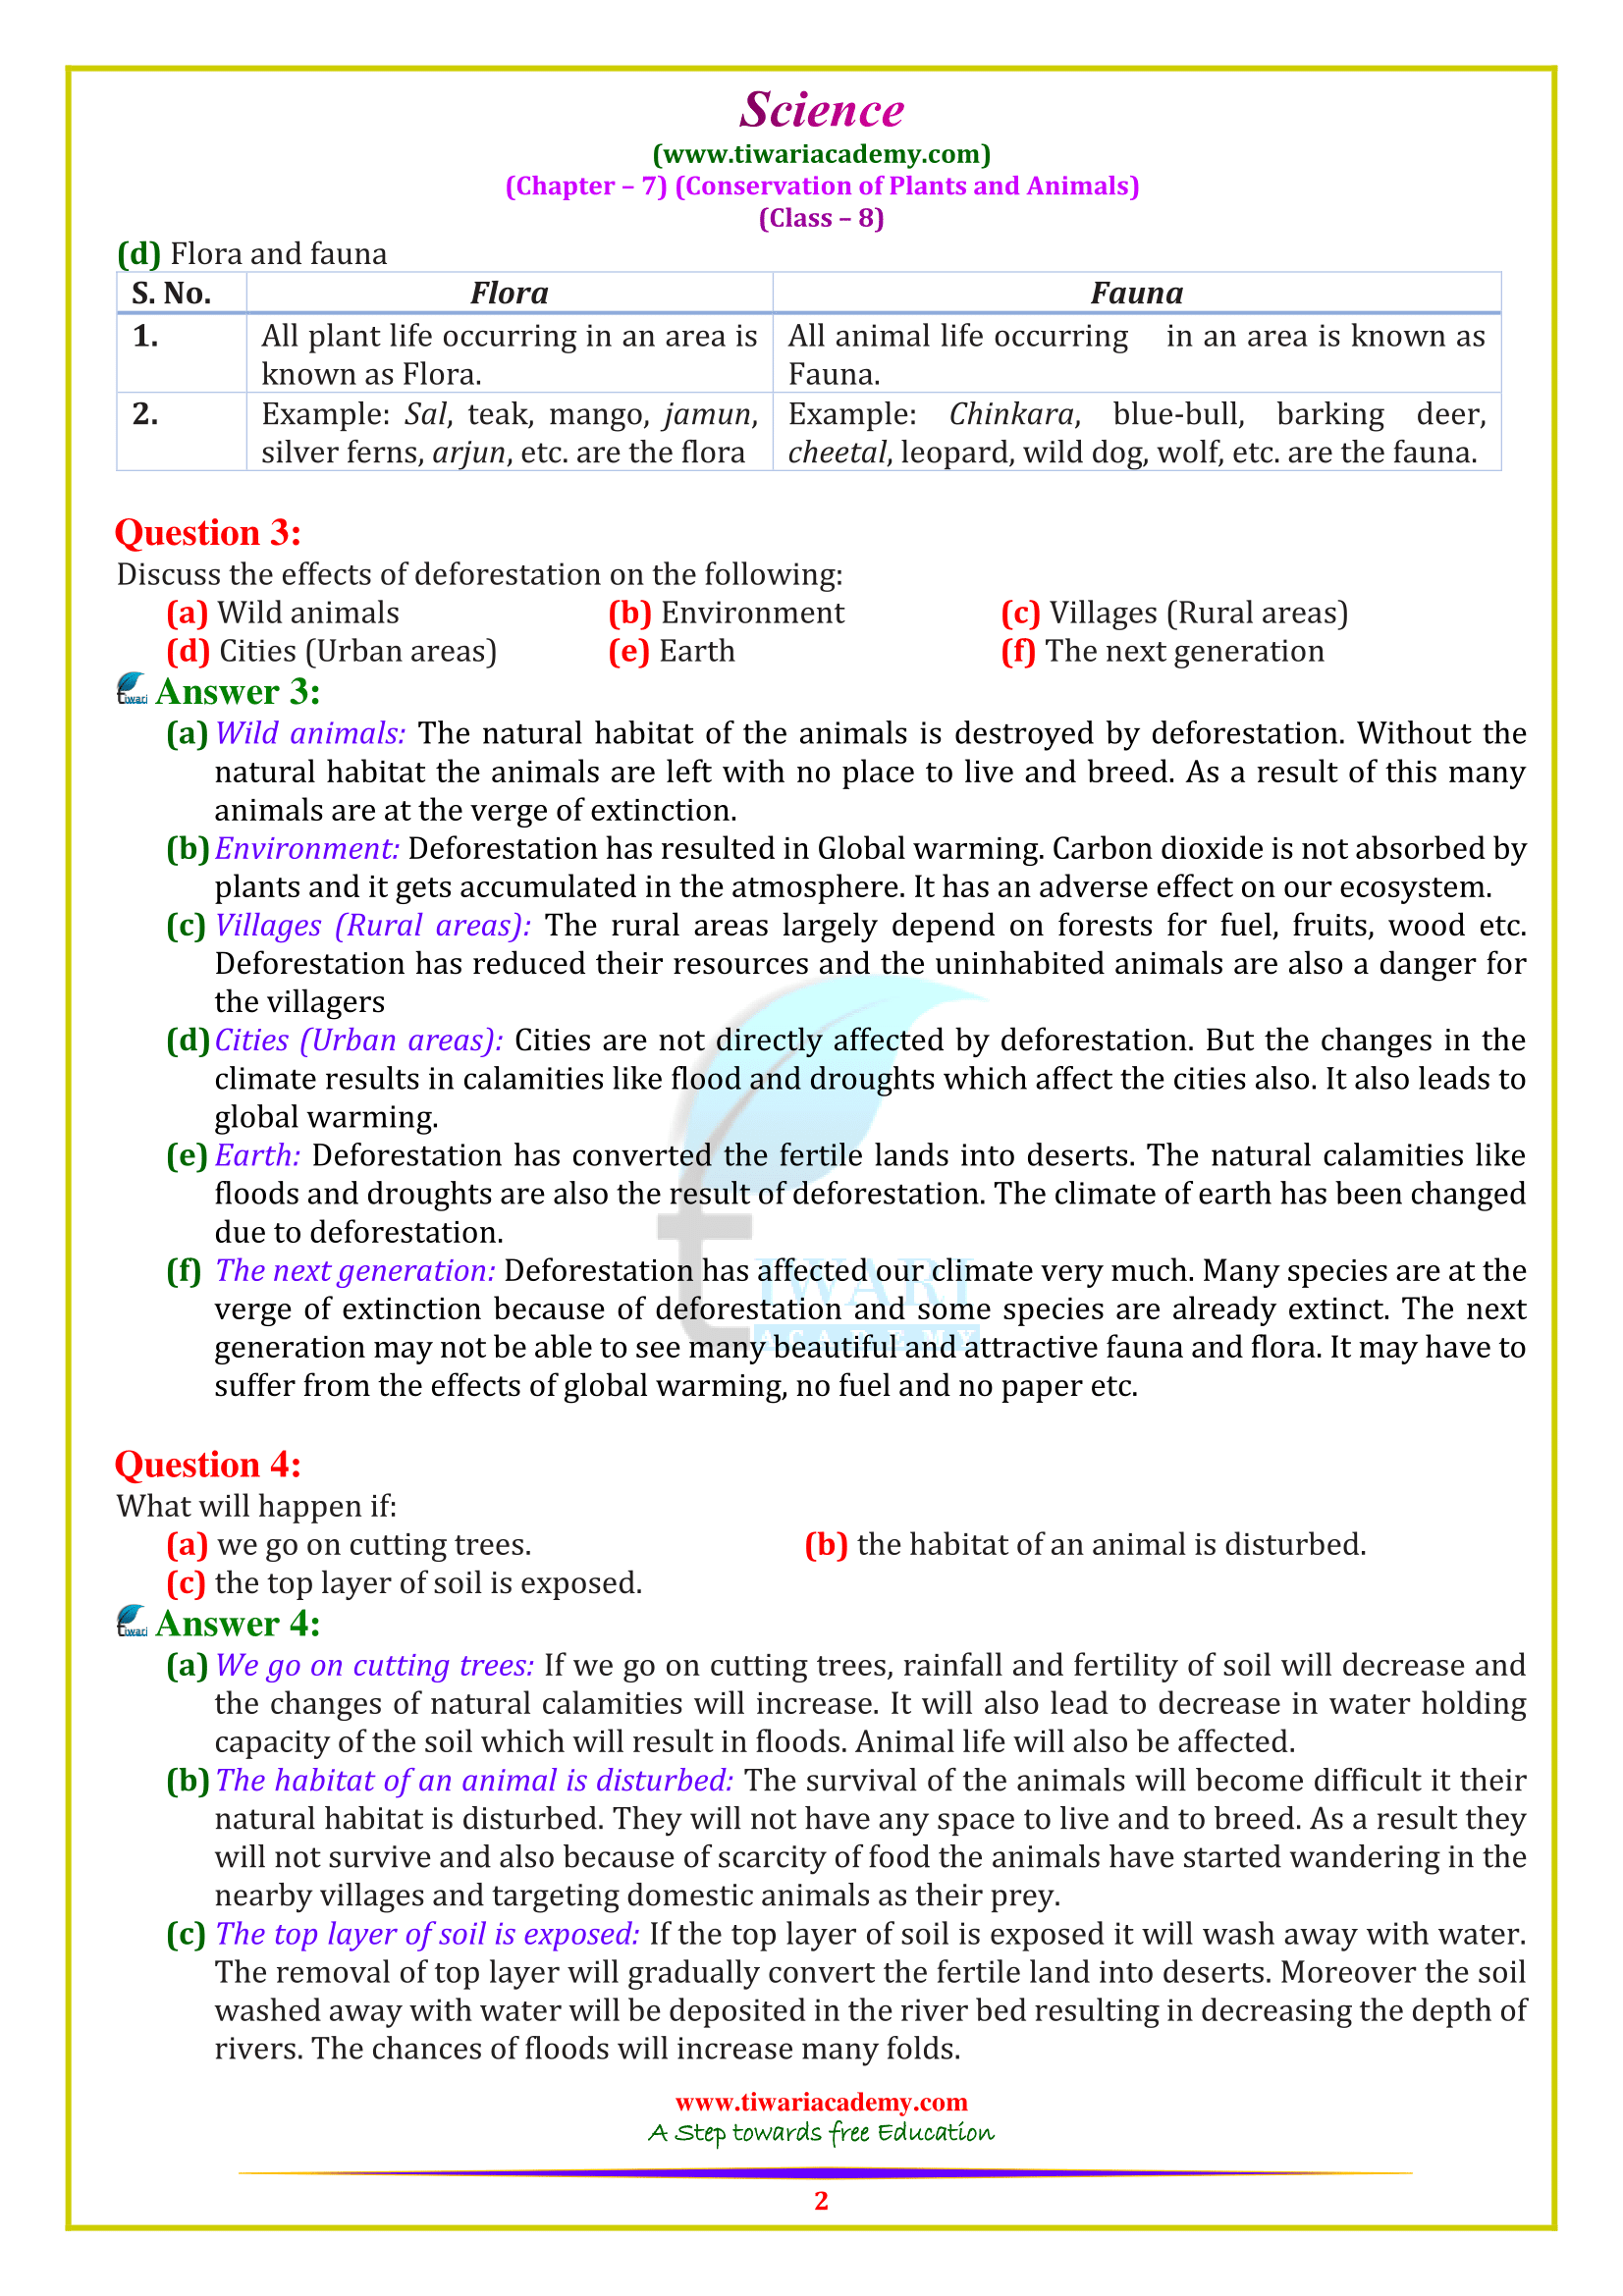 NCERT Solutions for Class 8 Science Chapter 7 in PDF free